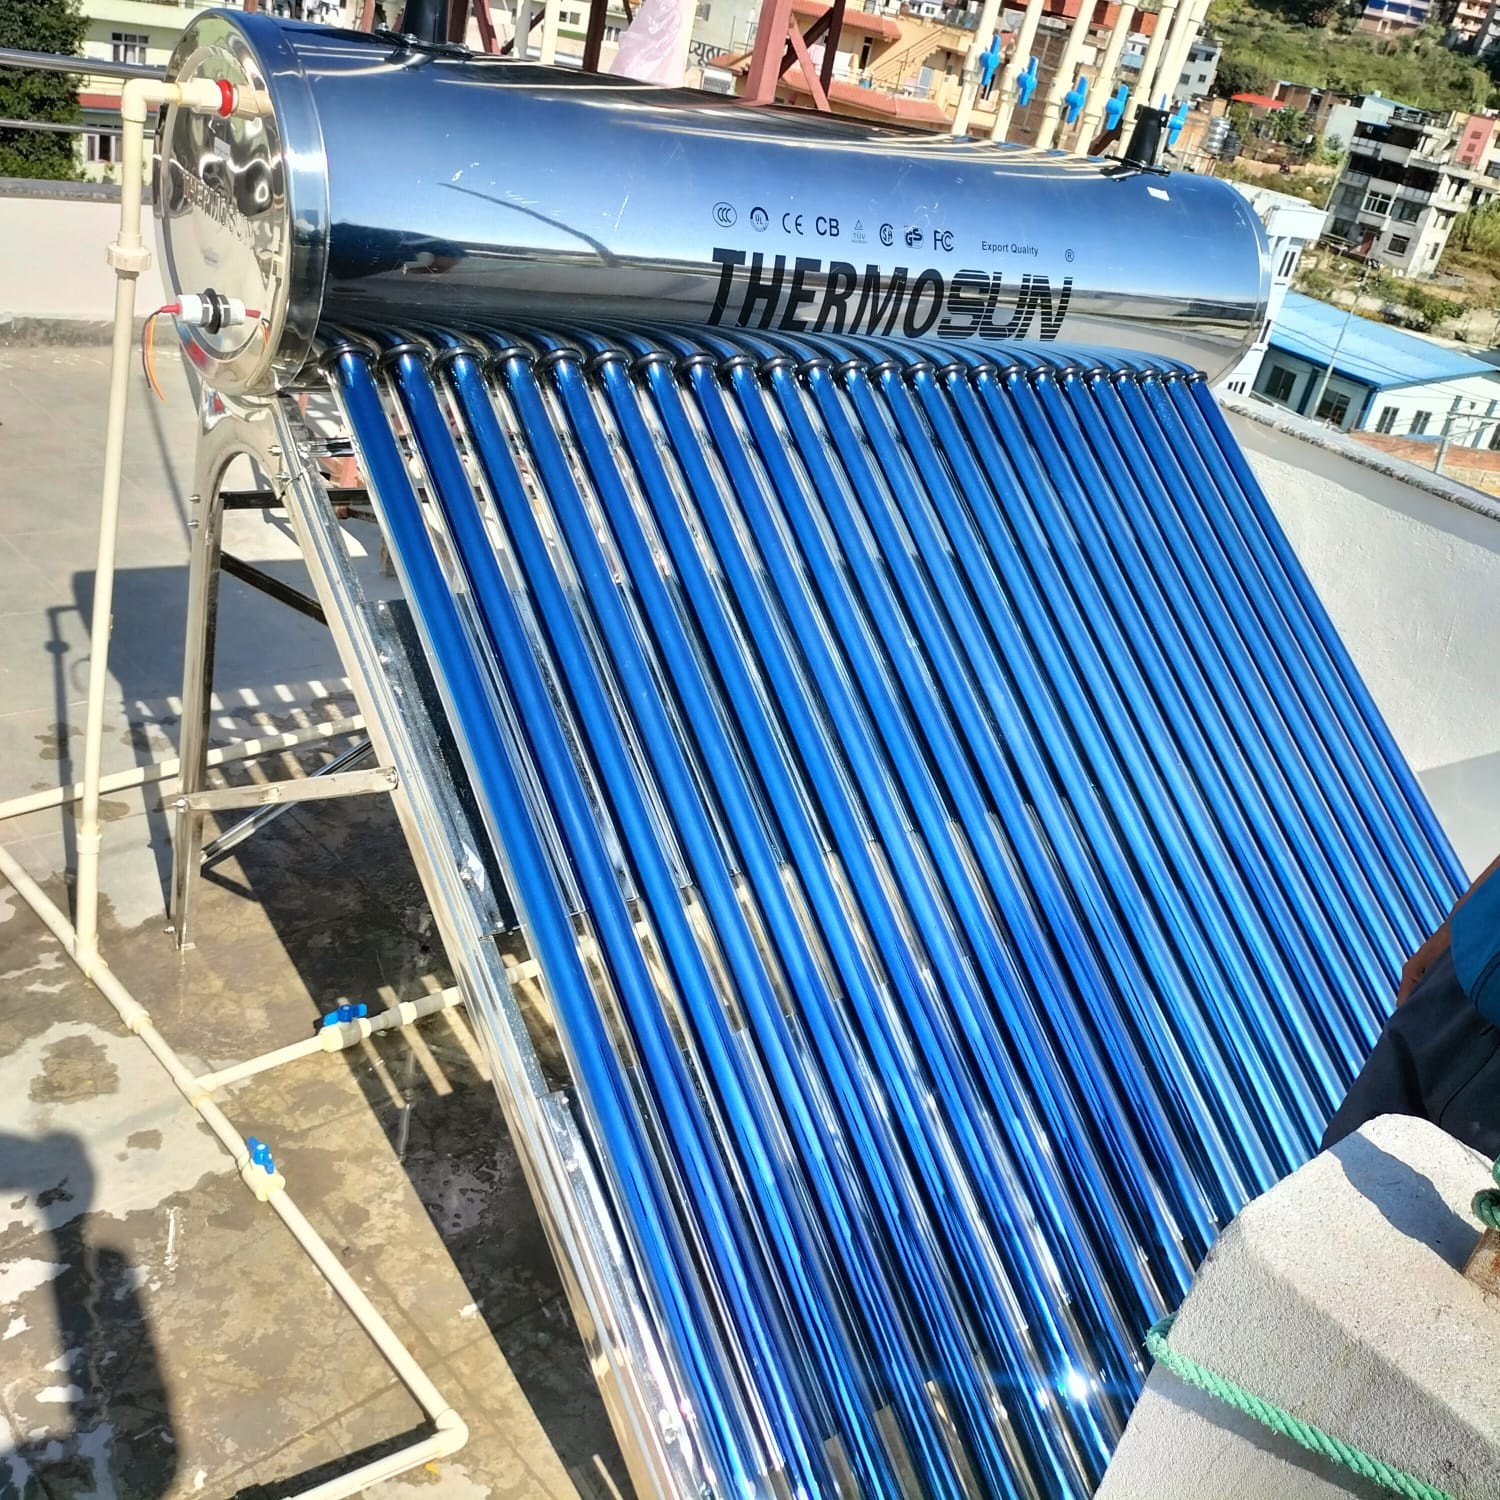 Thermosun Solar Water Heater 24T 300Ltr. -Trade Nepal